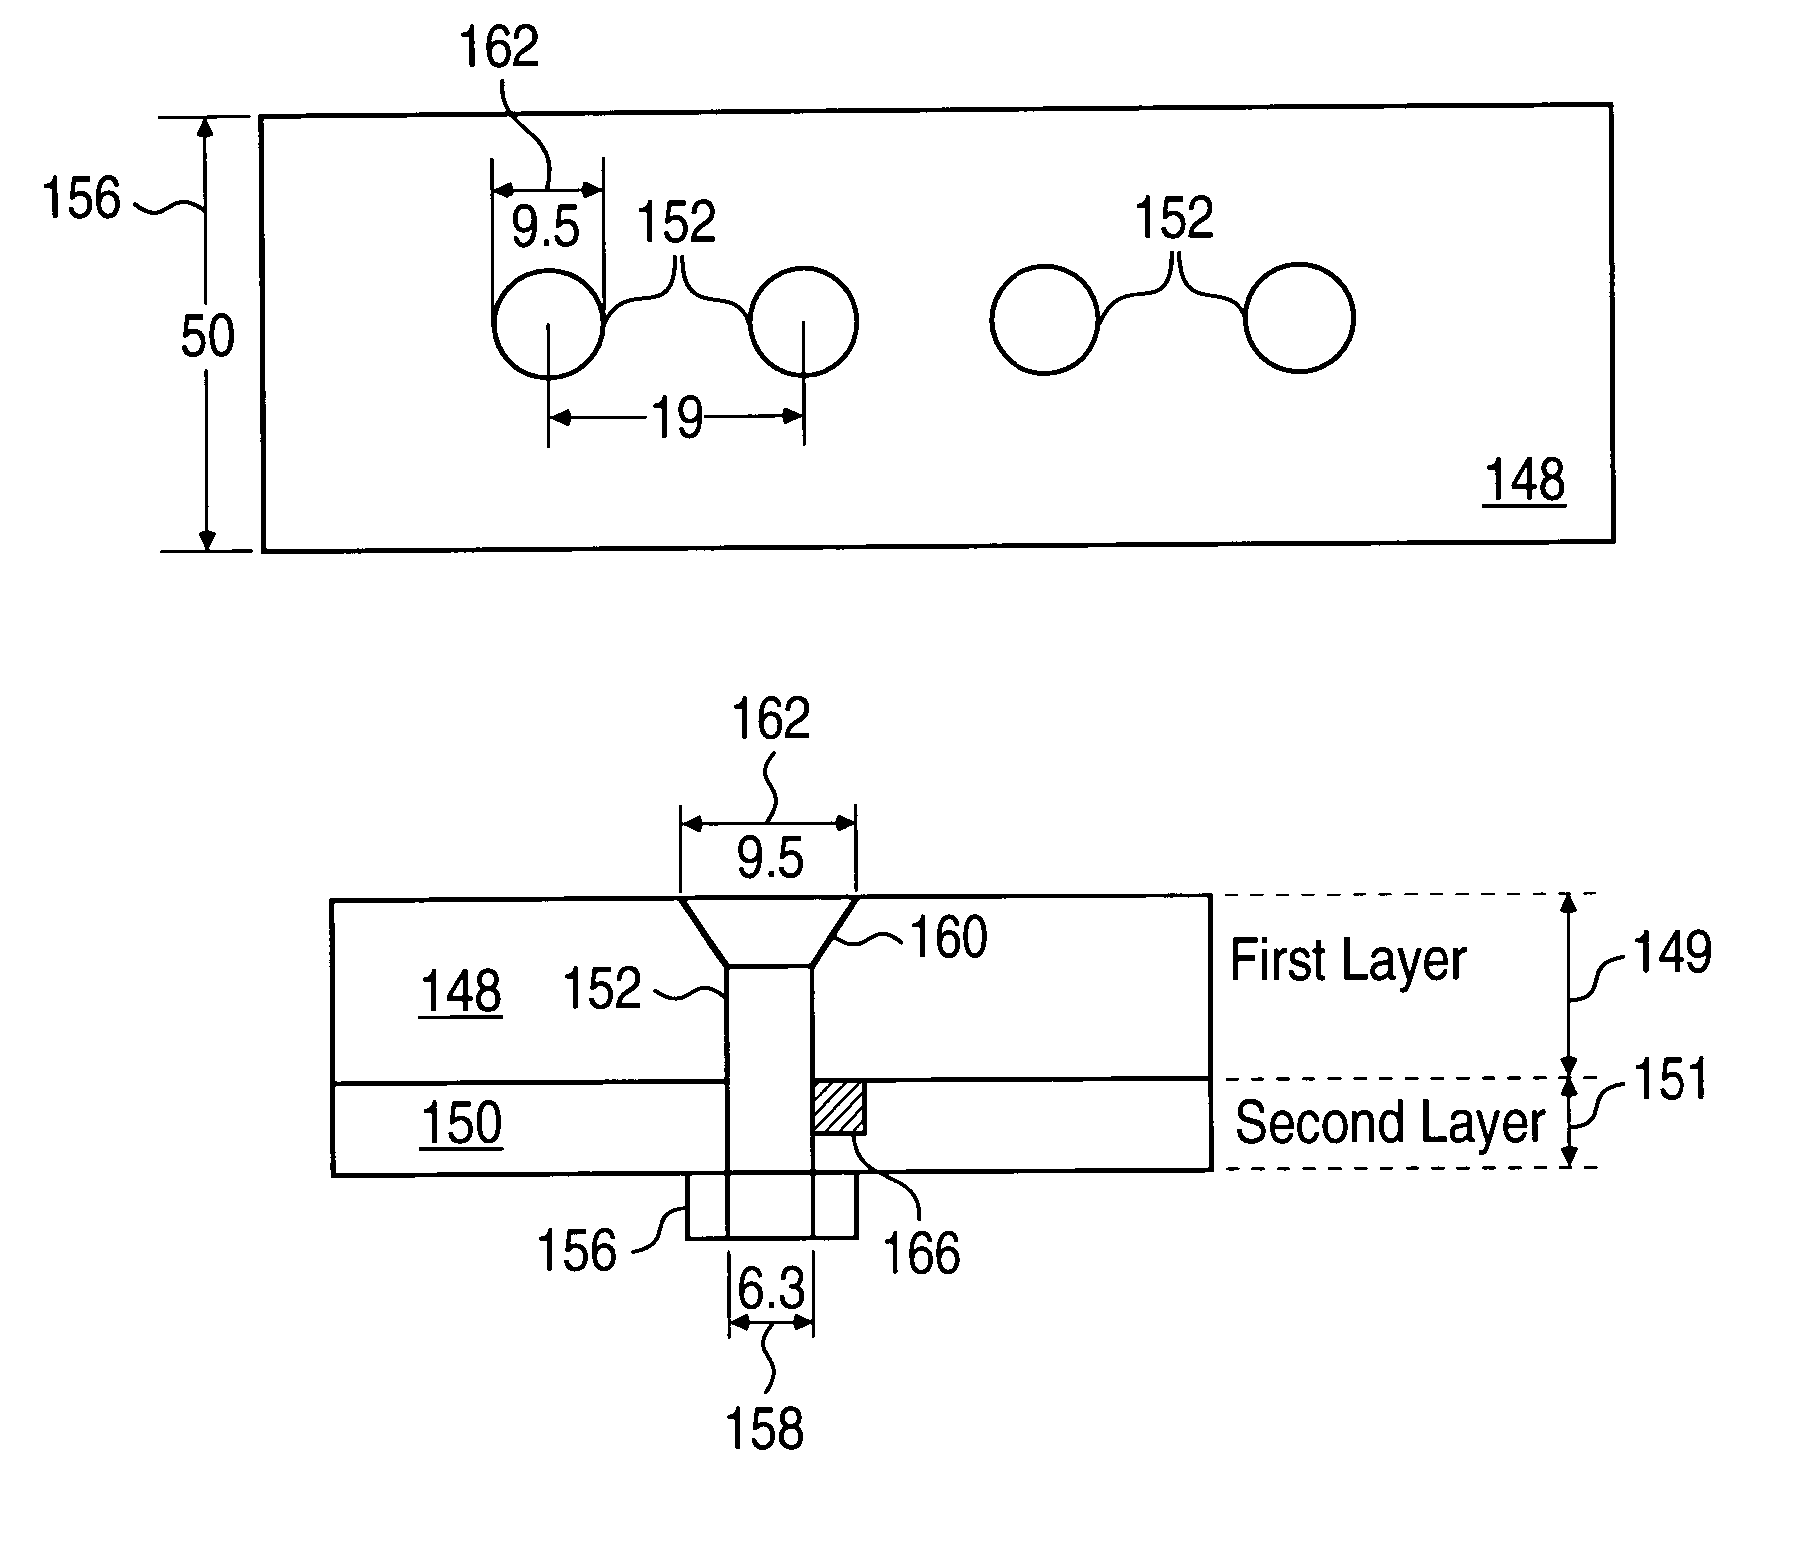 Probes and methods for detecting defects in metallic structures